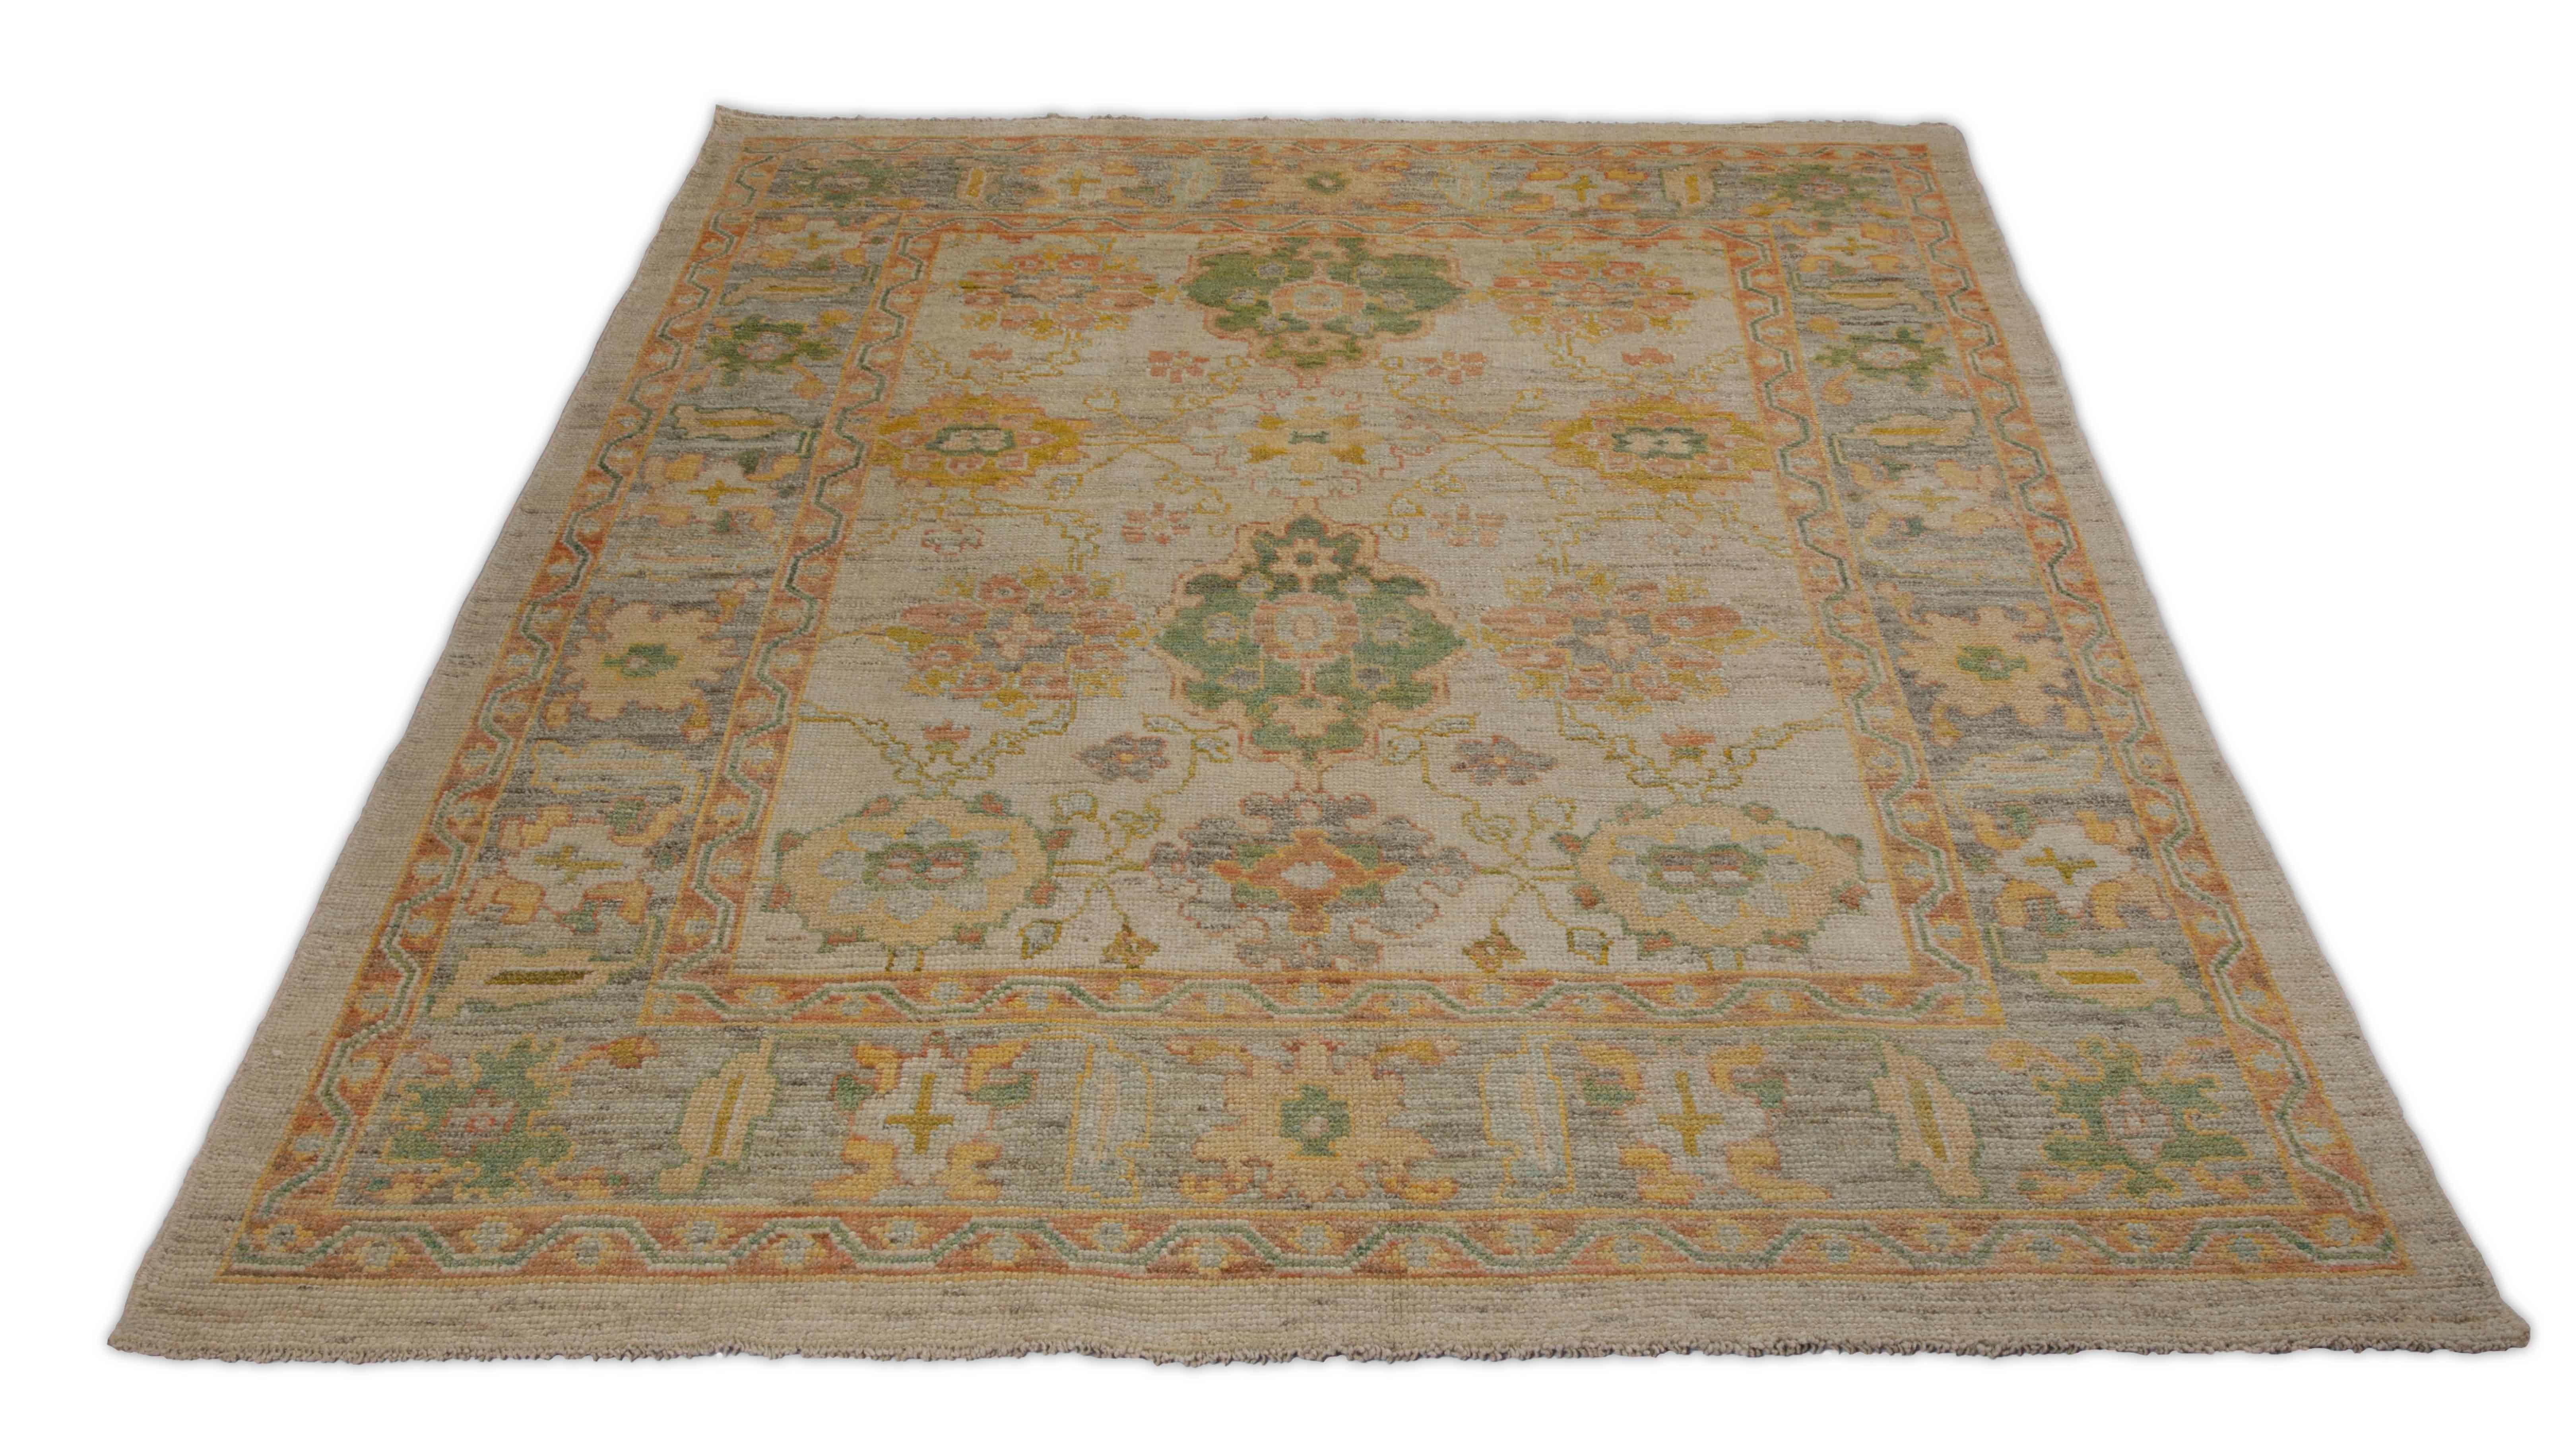 New Turkish rug made of handwoven sheep’s wool of the finest quality. It’s colored with organic vegetable dyes that are certified safe for humans and pets alike. It features a large, beige field with flower medallions allover associated with Oushak